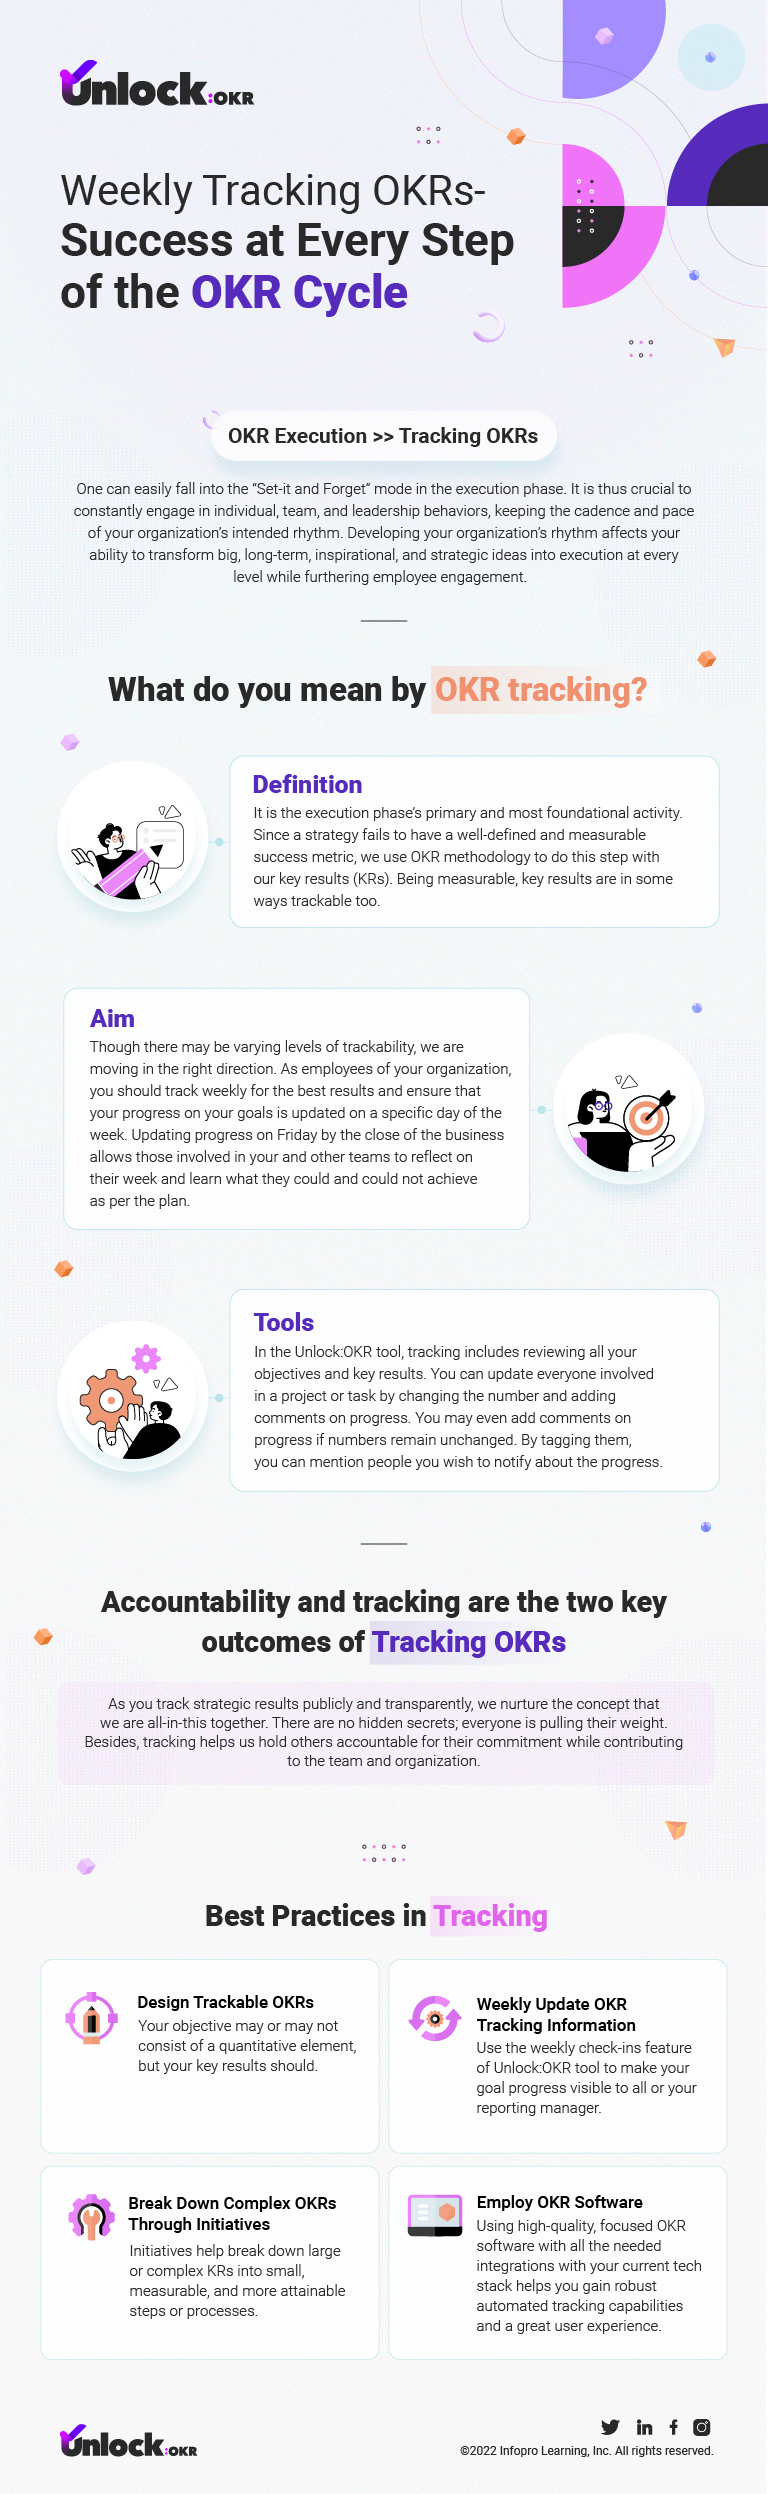 Weekly Tracking OKRs-Success at every step of the OKR cycle